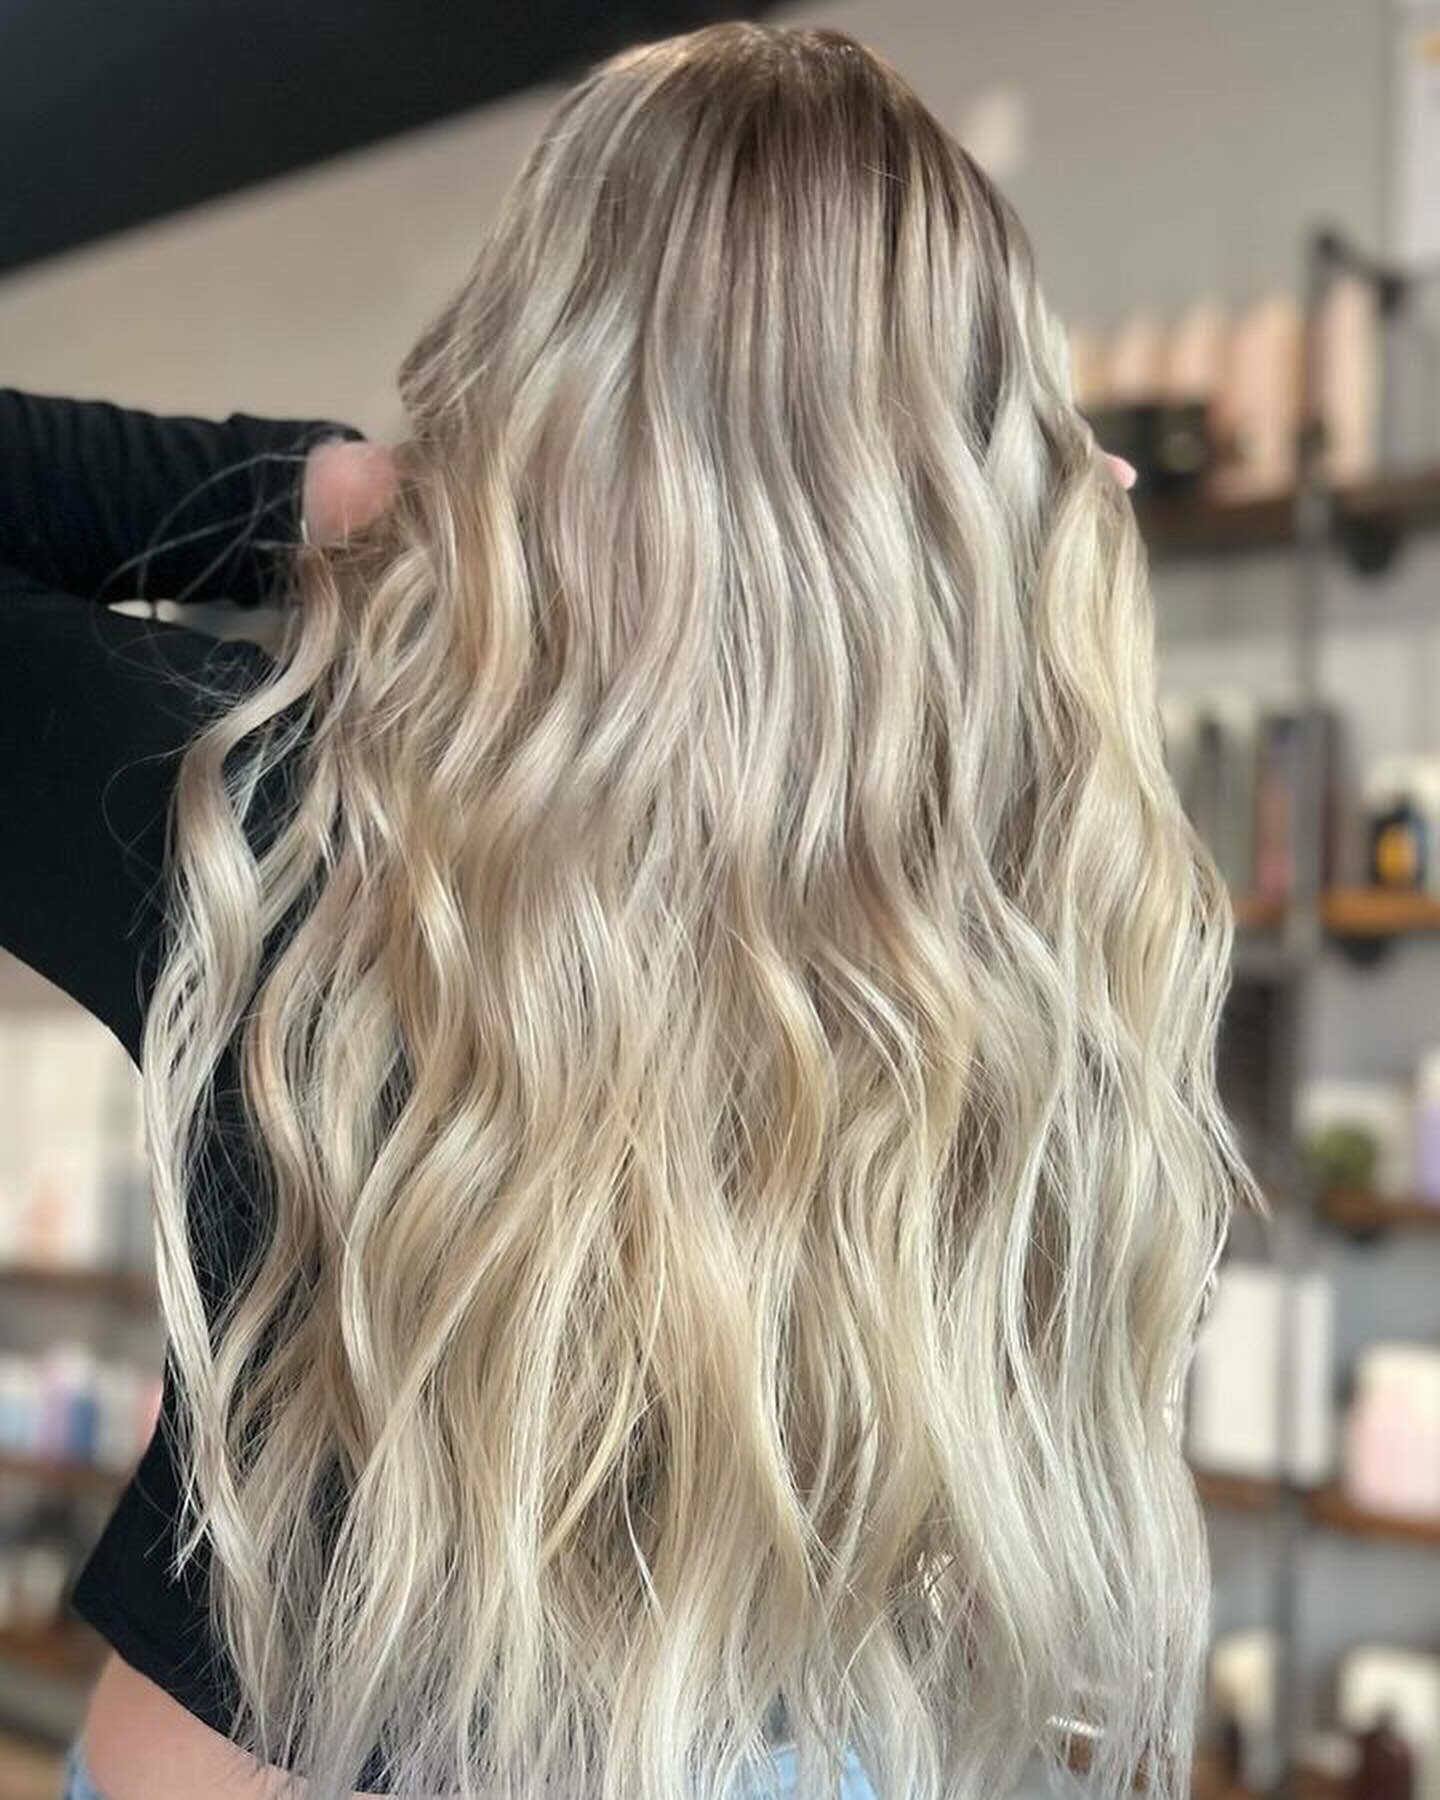 Letting this color correction do alllll the talking 😍😍 Swipe for the before ➡️➡️

Color correction by @taylored.beauty 

Get the hair transformation of your dreams with us by booking online at one10beauty.com or call us at 615.454.2873!!
.
.
.
#hai